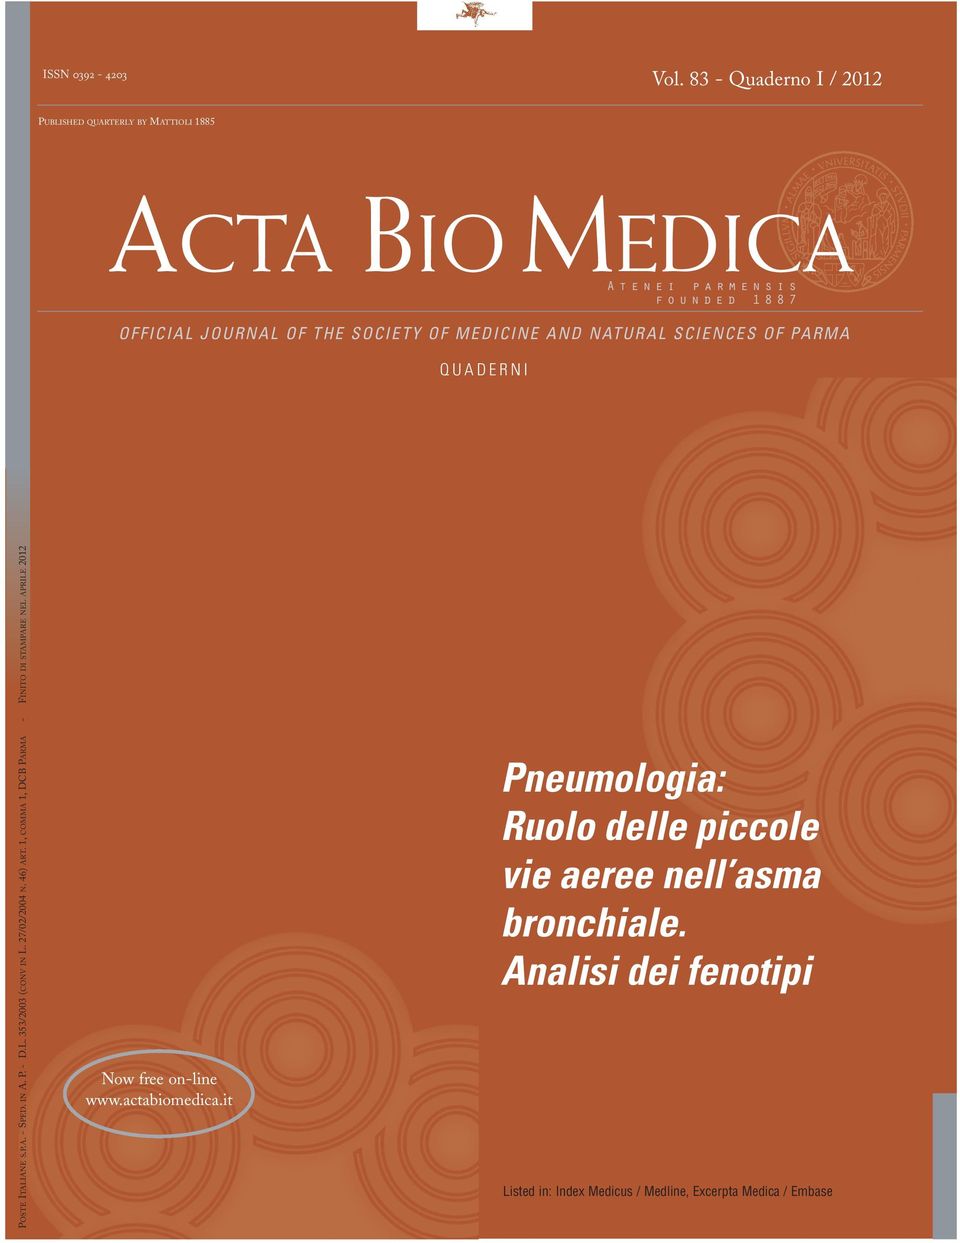 JOURNAL OF THE SOCIETY OF MEDICINE AND NATURAL SCIENCES OF PARMA Q U A D E R N I POSTE ITALIANE S.P.A. - SPED. IN A. P. - D.L. 353/2003 (CONV IN L.